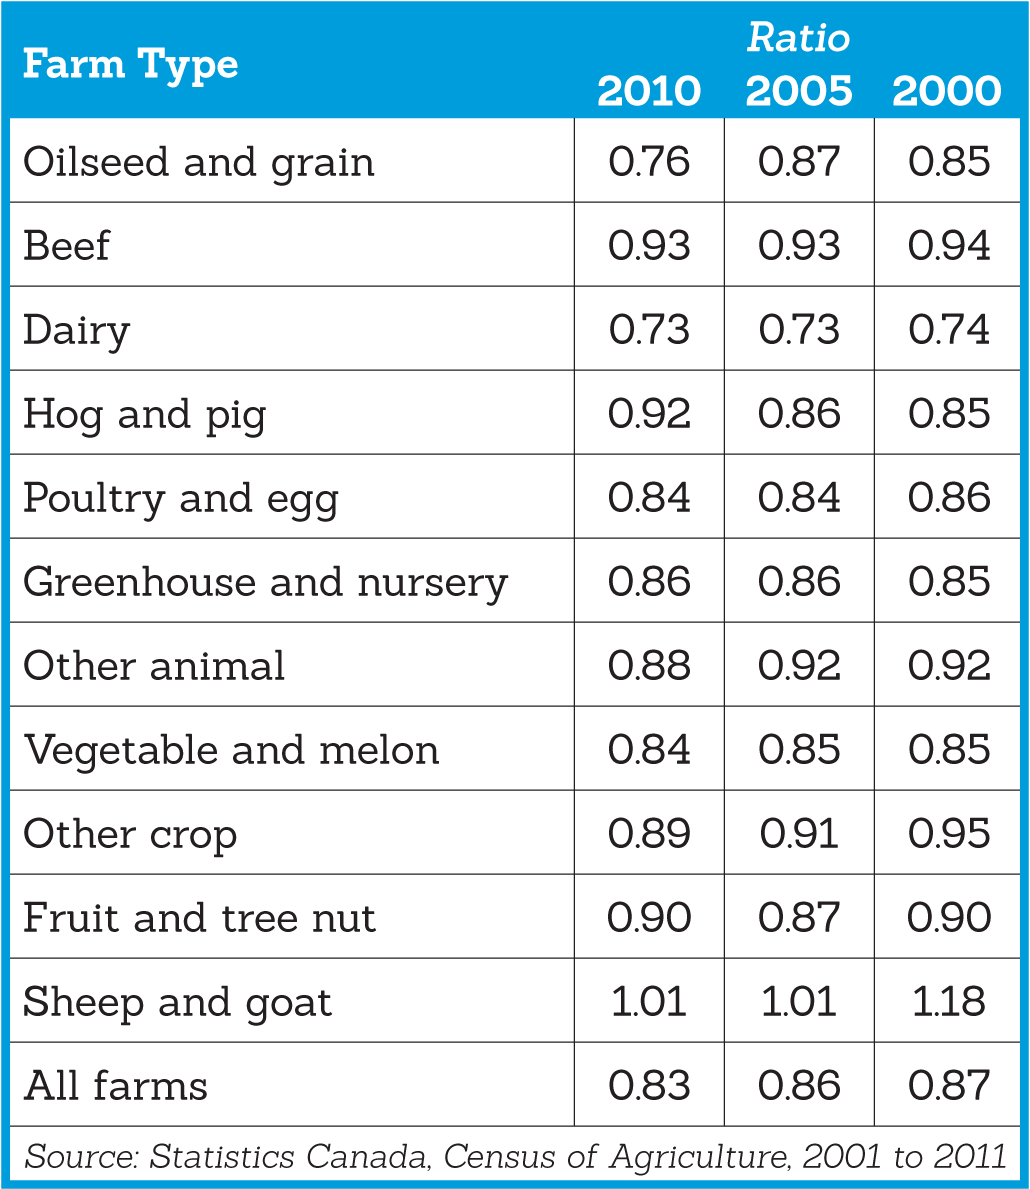 A table of farm type and average cost for every dollar spent